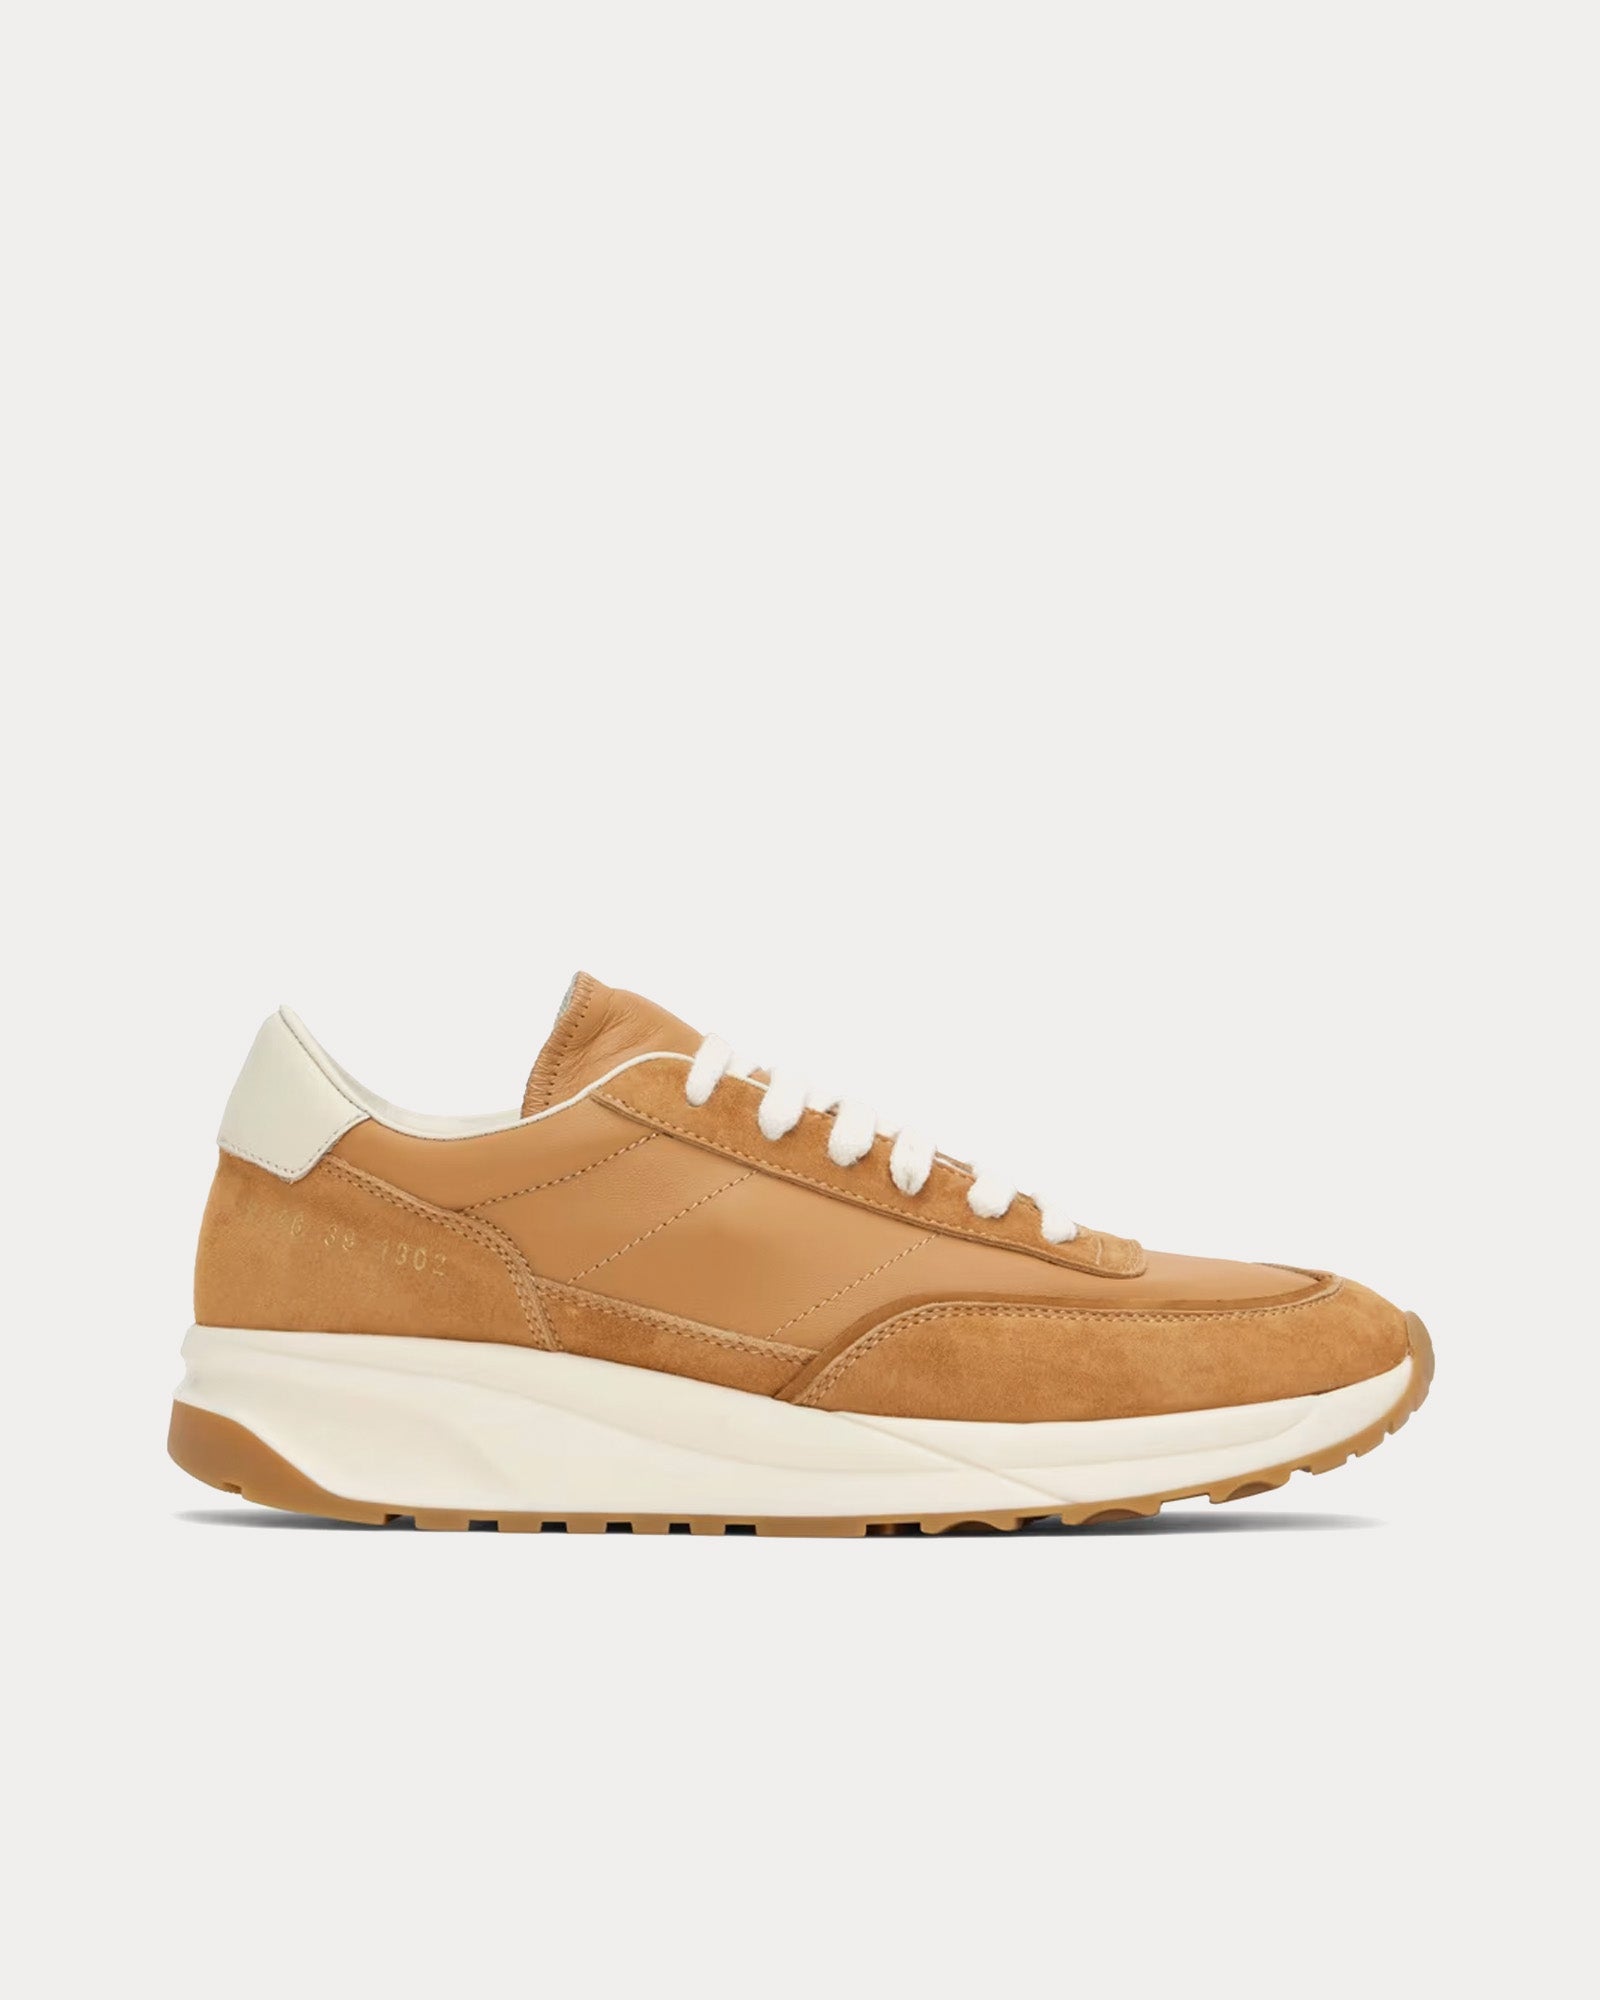 Common Projects - Track 80s Tan Low Top Sneakers